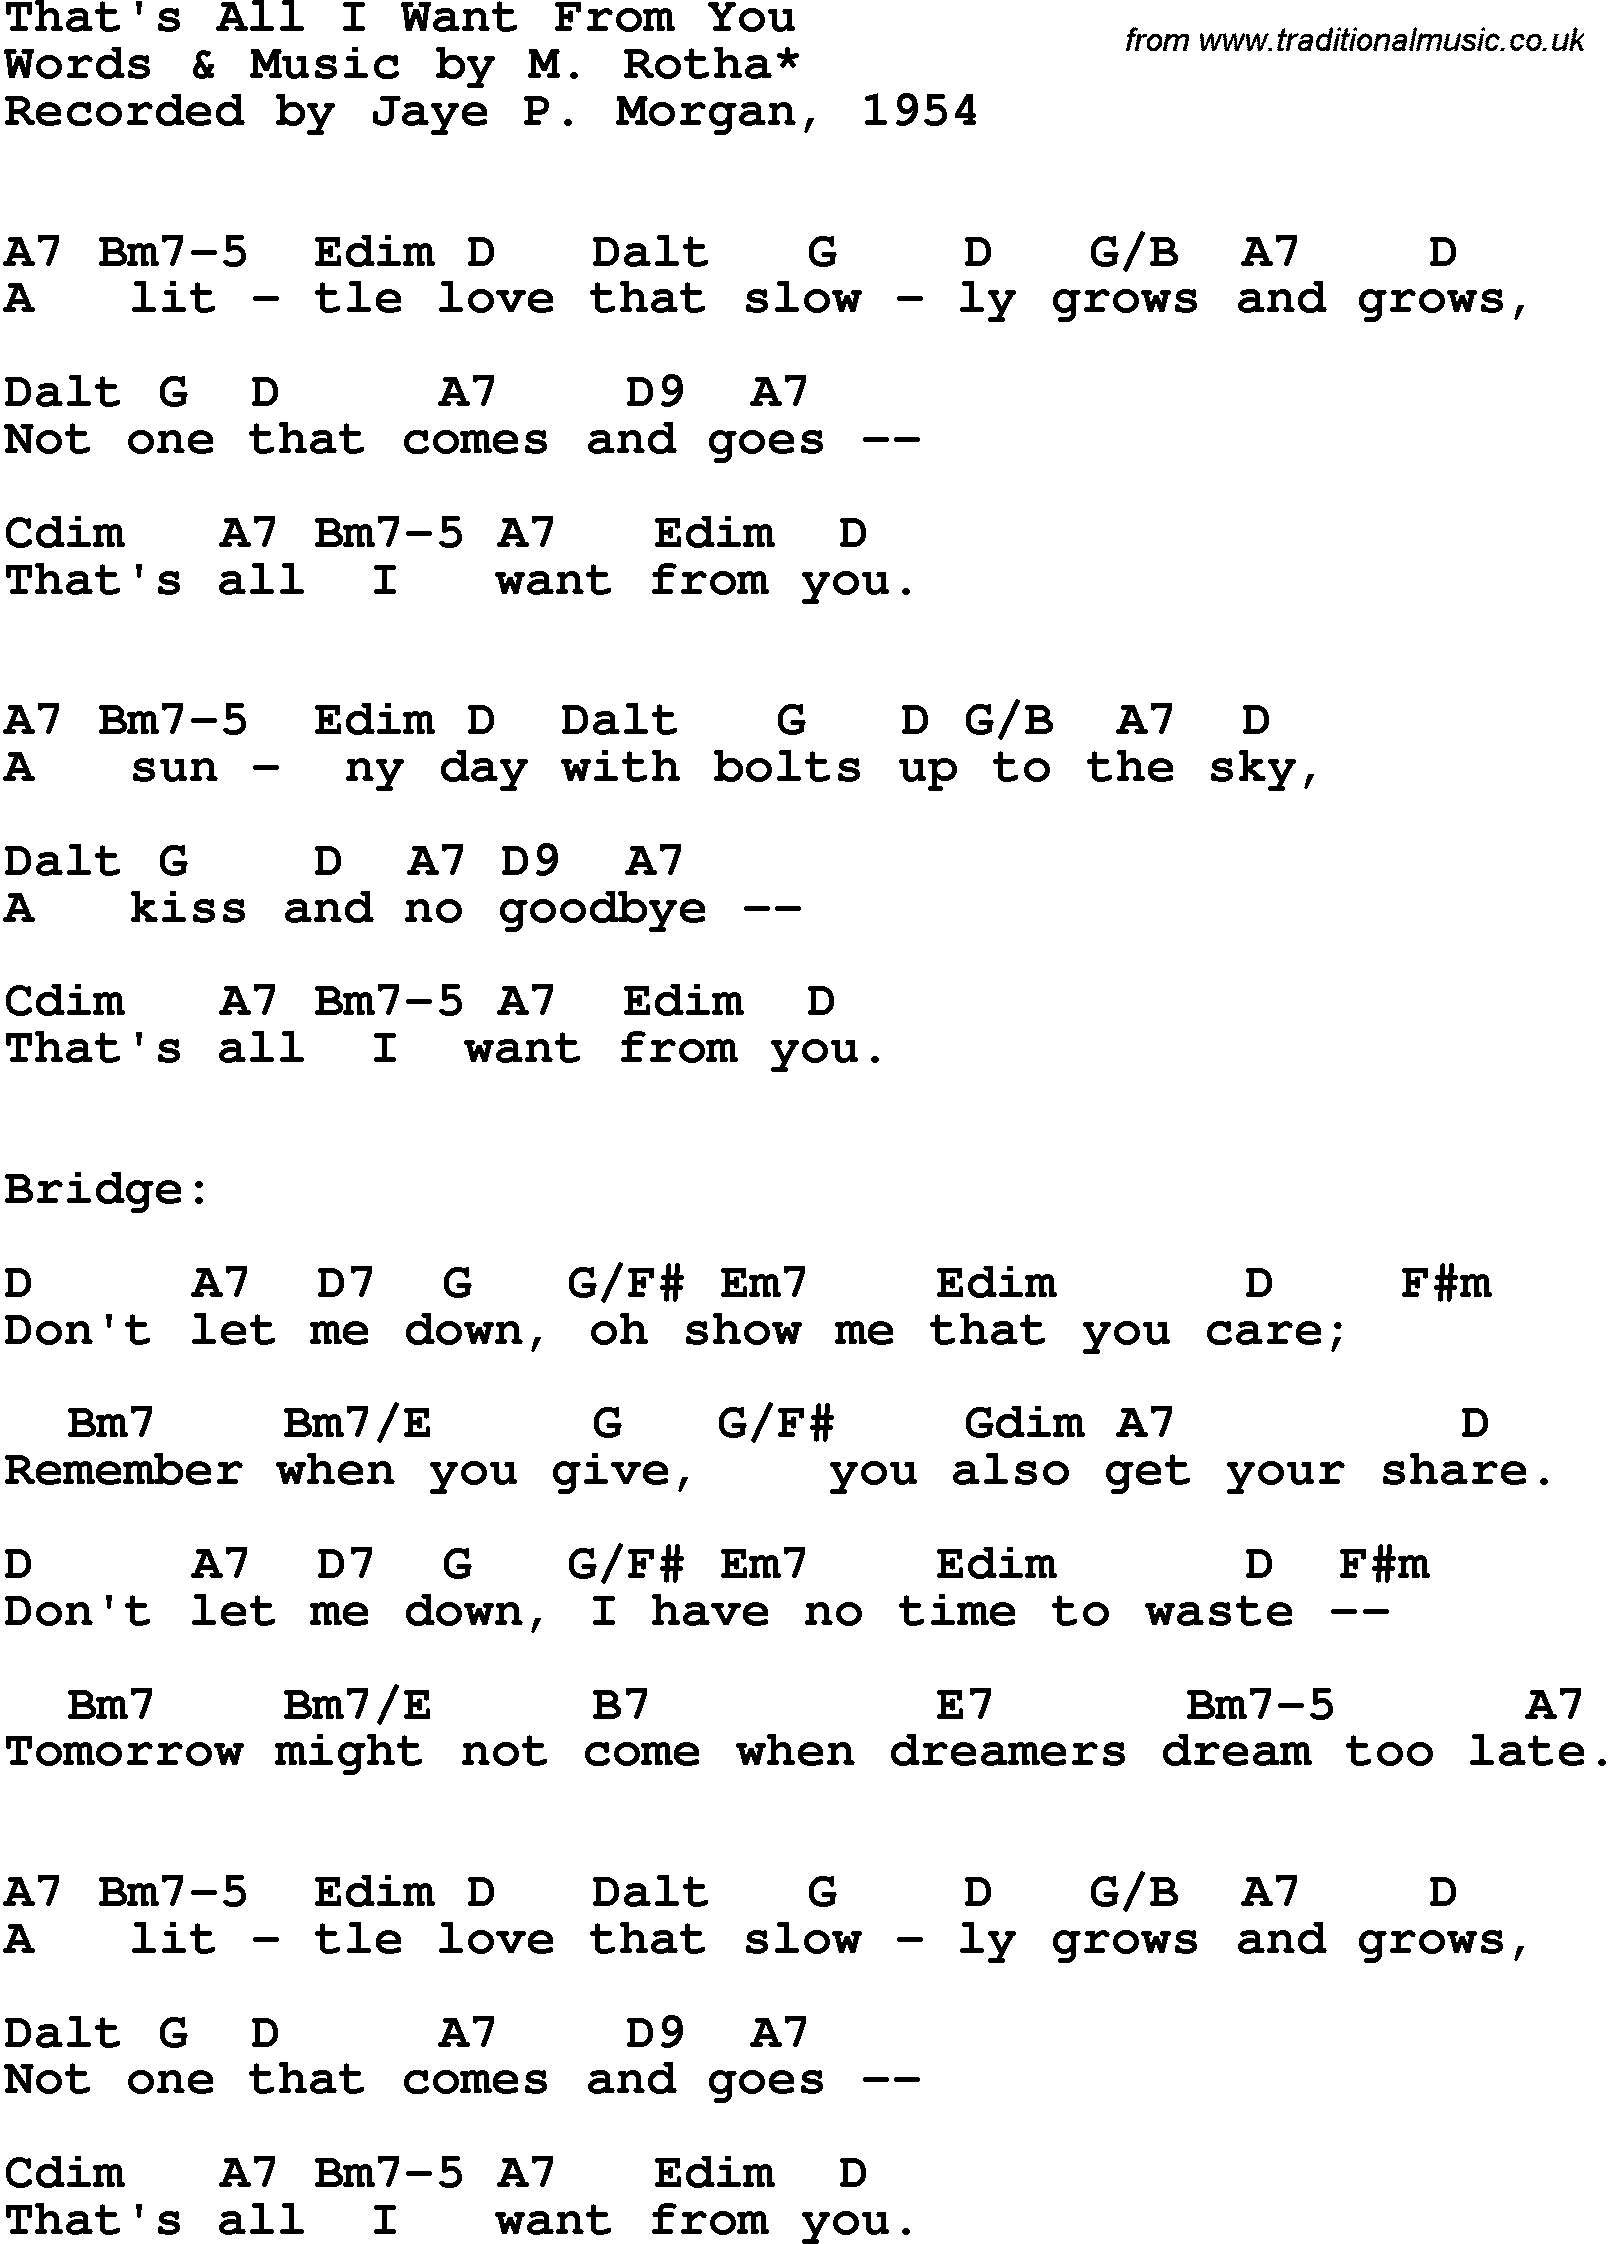 Song Lyrics with guitar chords for That's All I Want From You - Jaye P